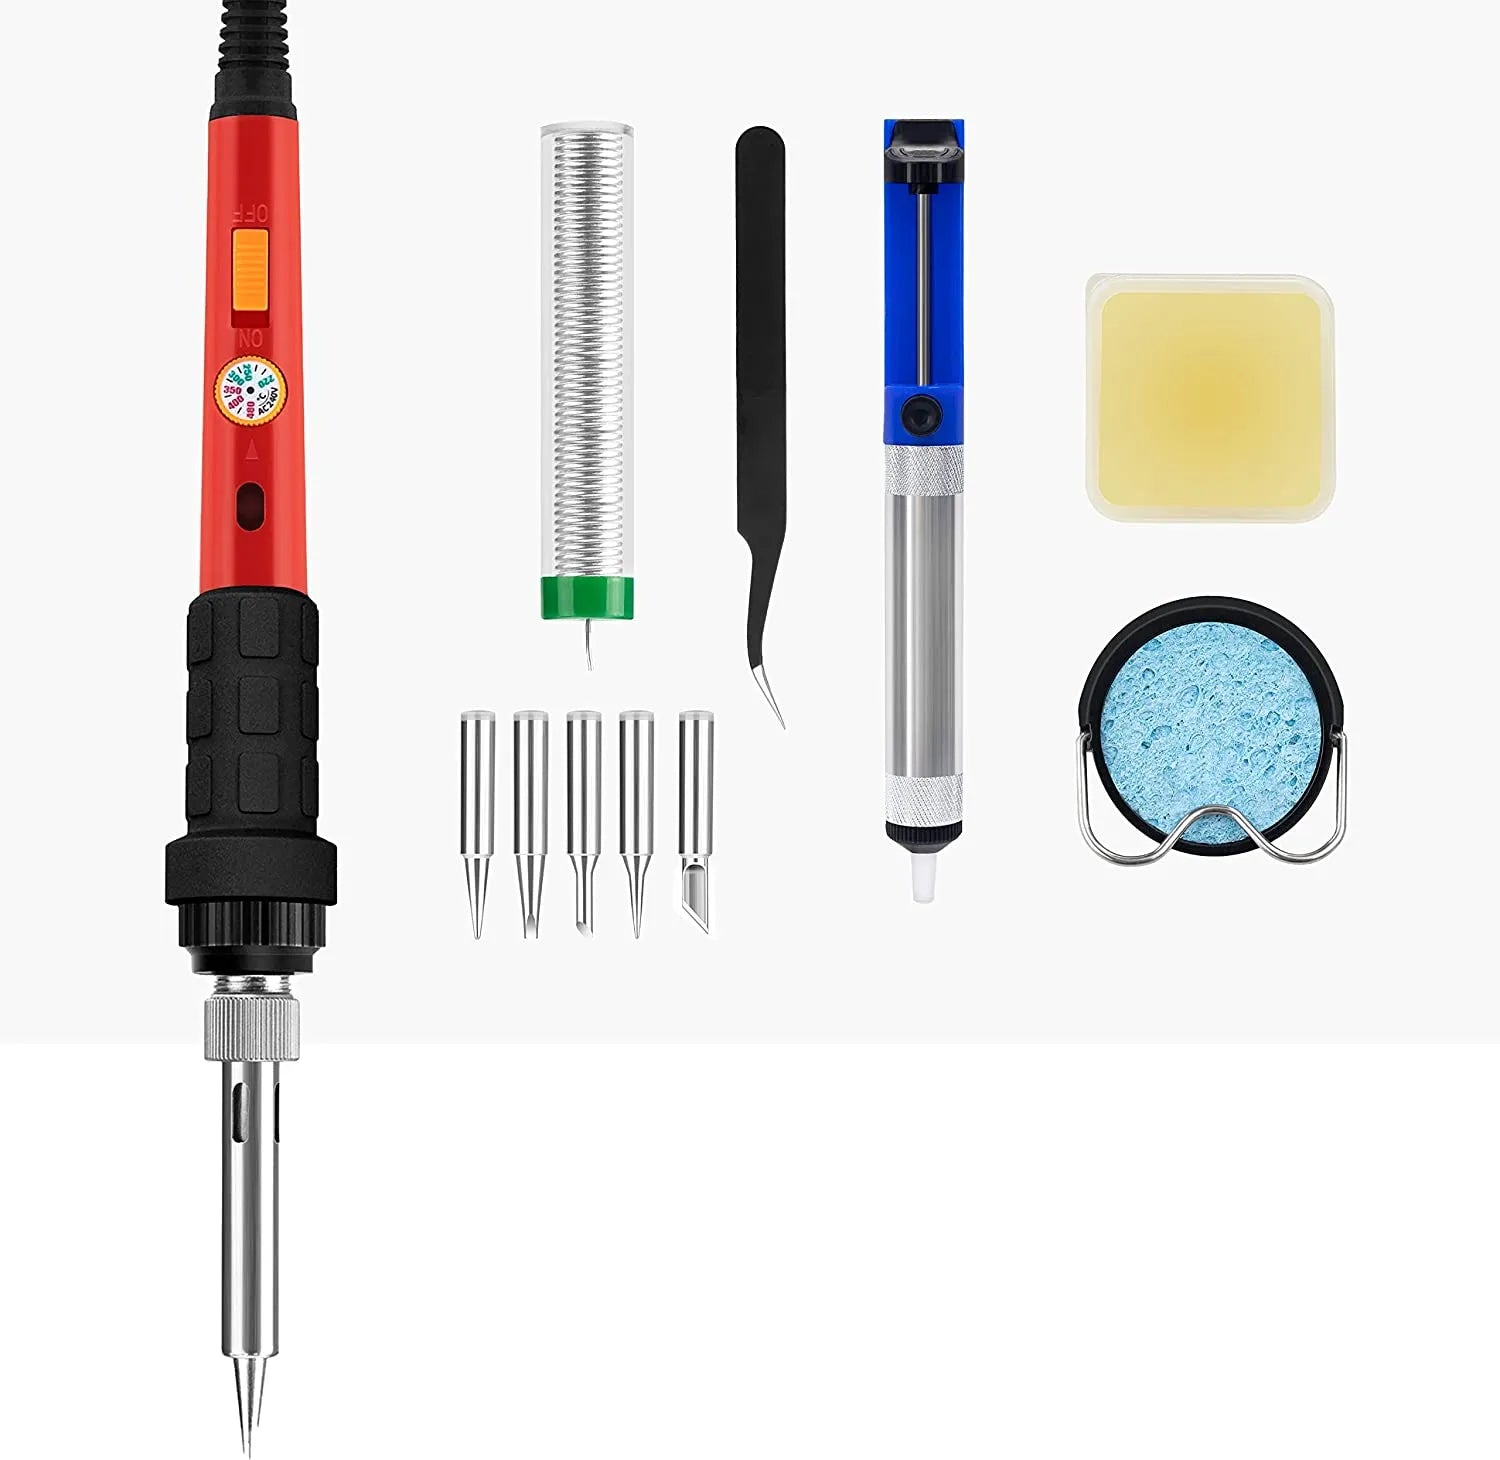 KAIWEETS Electric Soldering Iron Kit KETS01, 11 inches, Adjustable Temperature, Upgraded Ceramic Heating Core